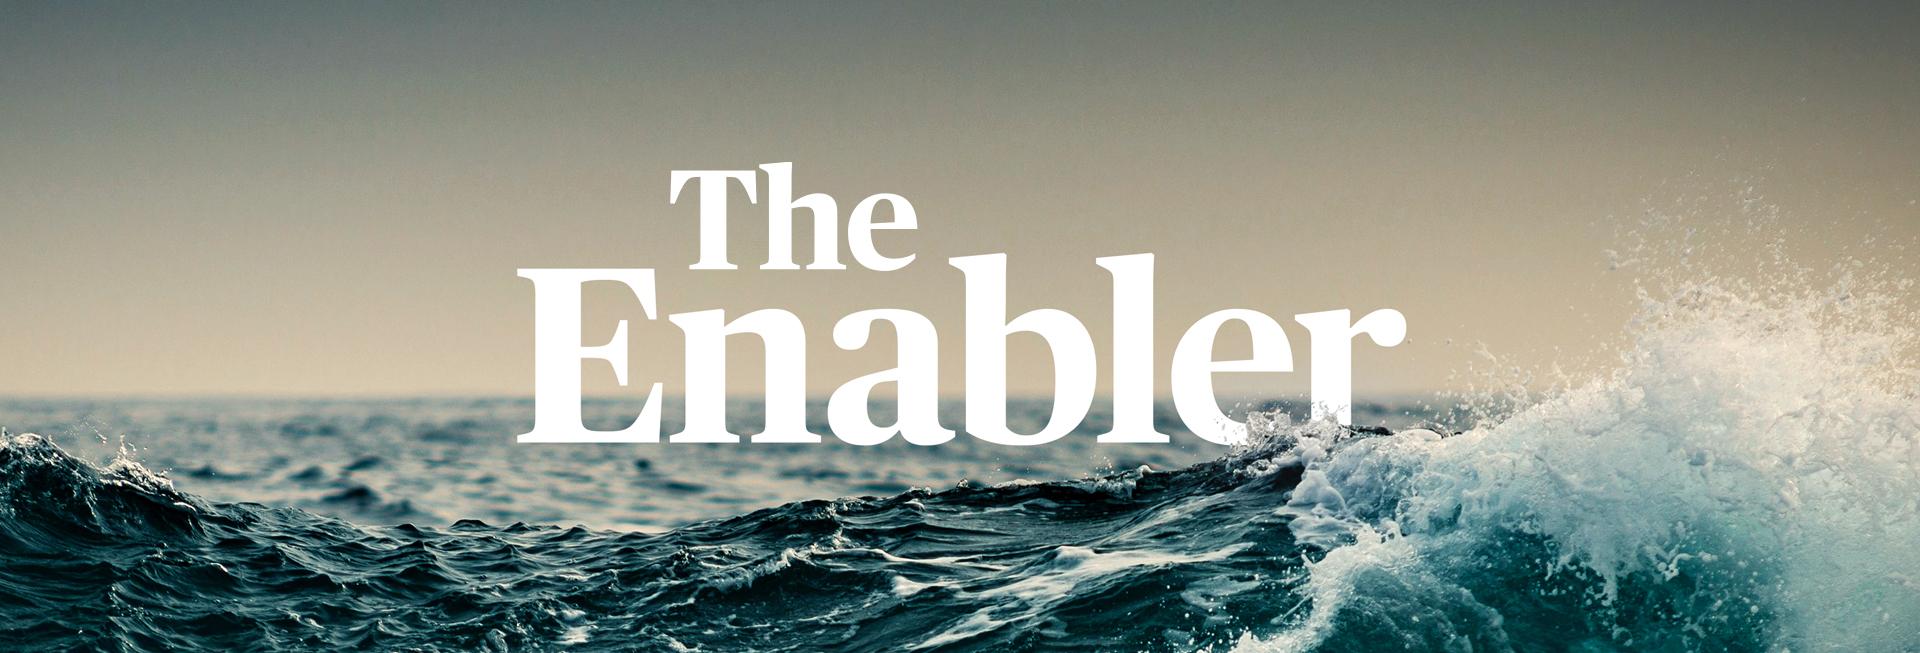 The Enabler logo with waves in the background